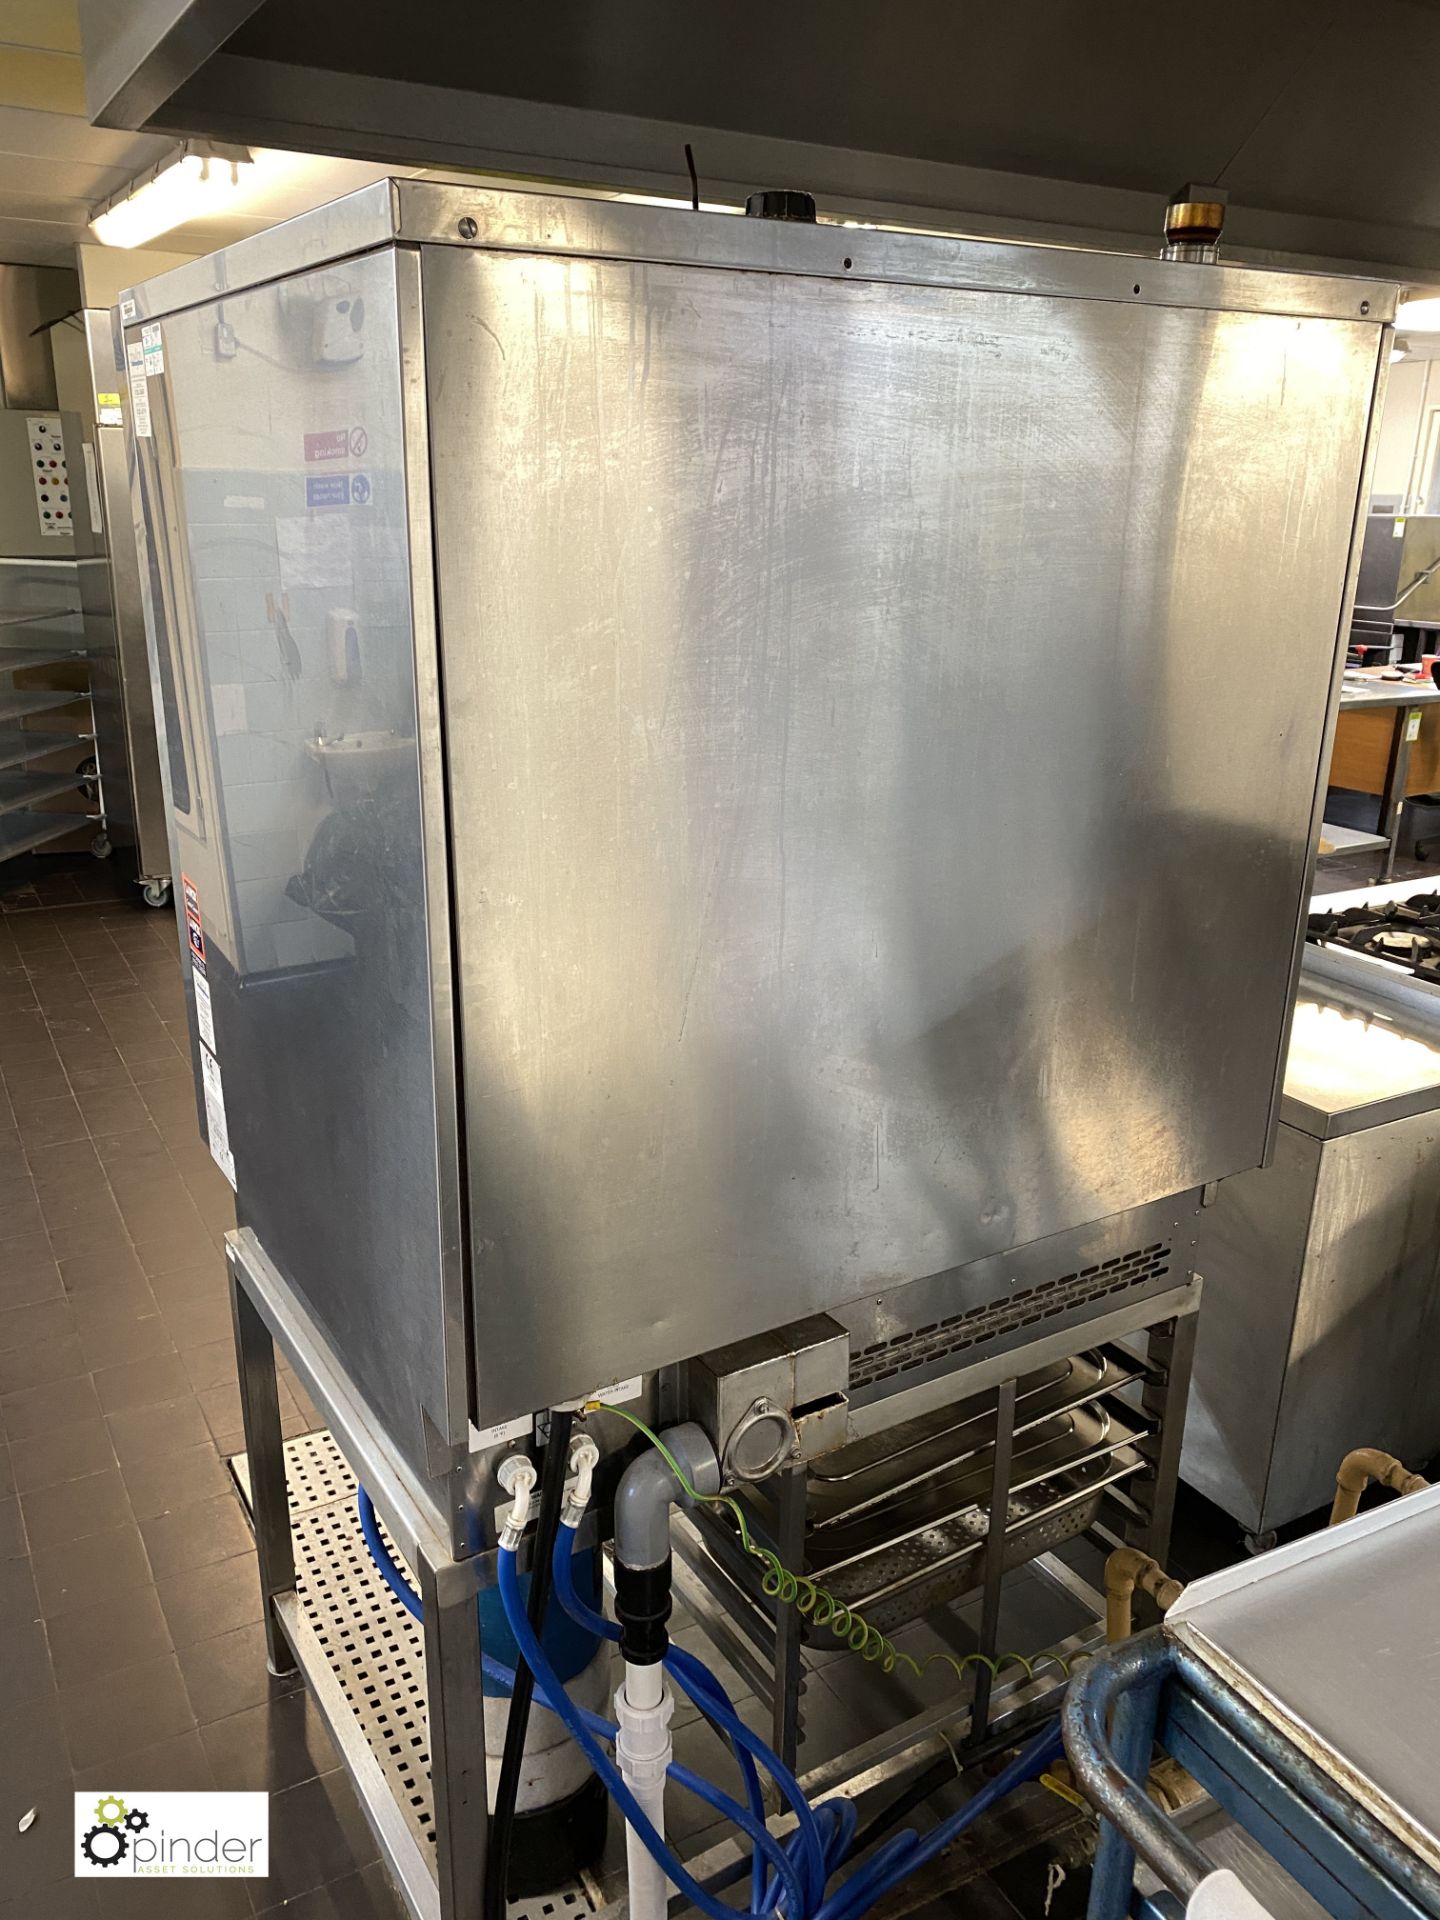 Lainox HME101P Combi Oven, 1000mm wide x 860mm deep x 1100mm high, 400volts, with stainless steel - Image 8 of 8